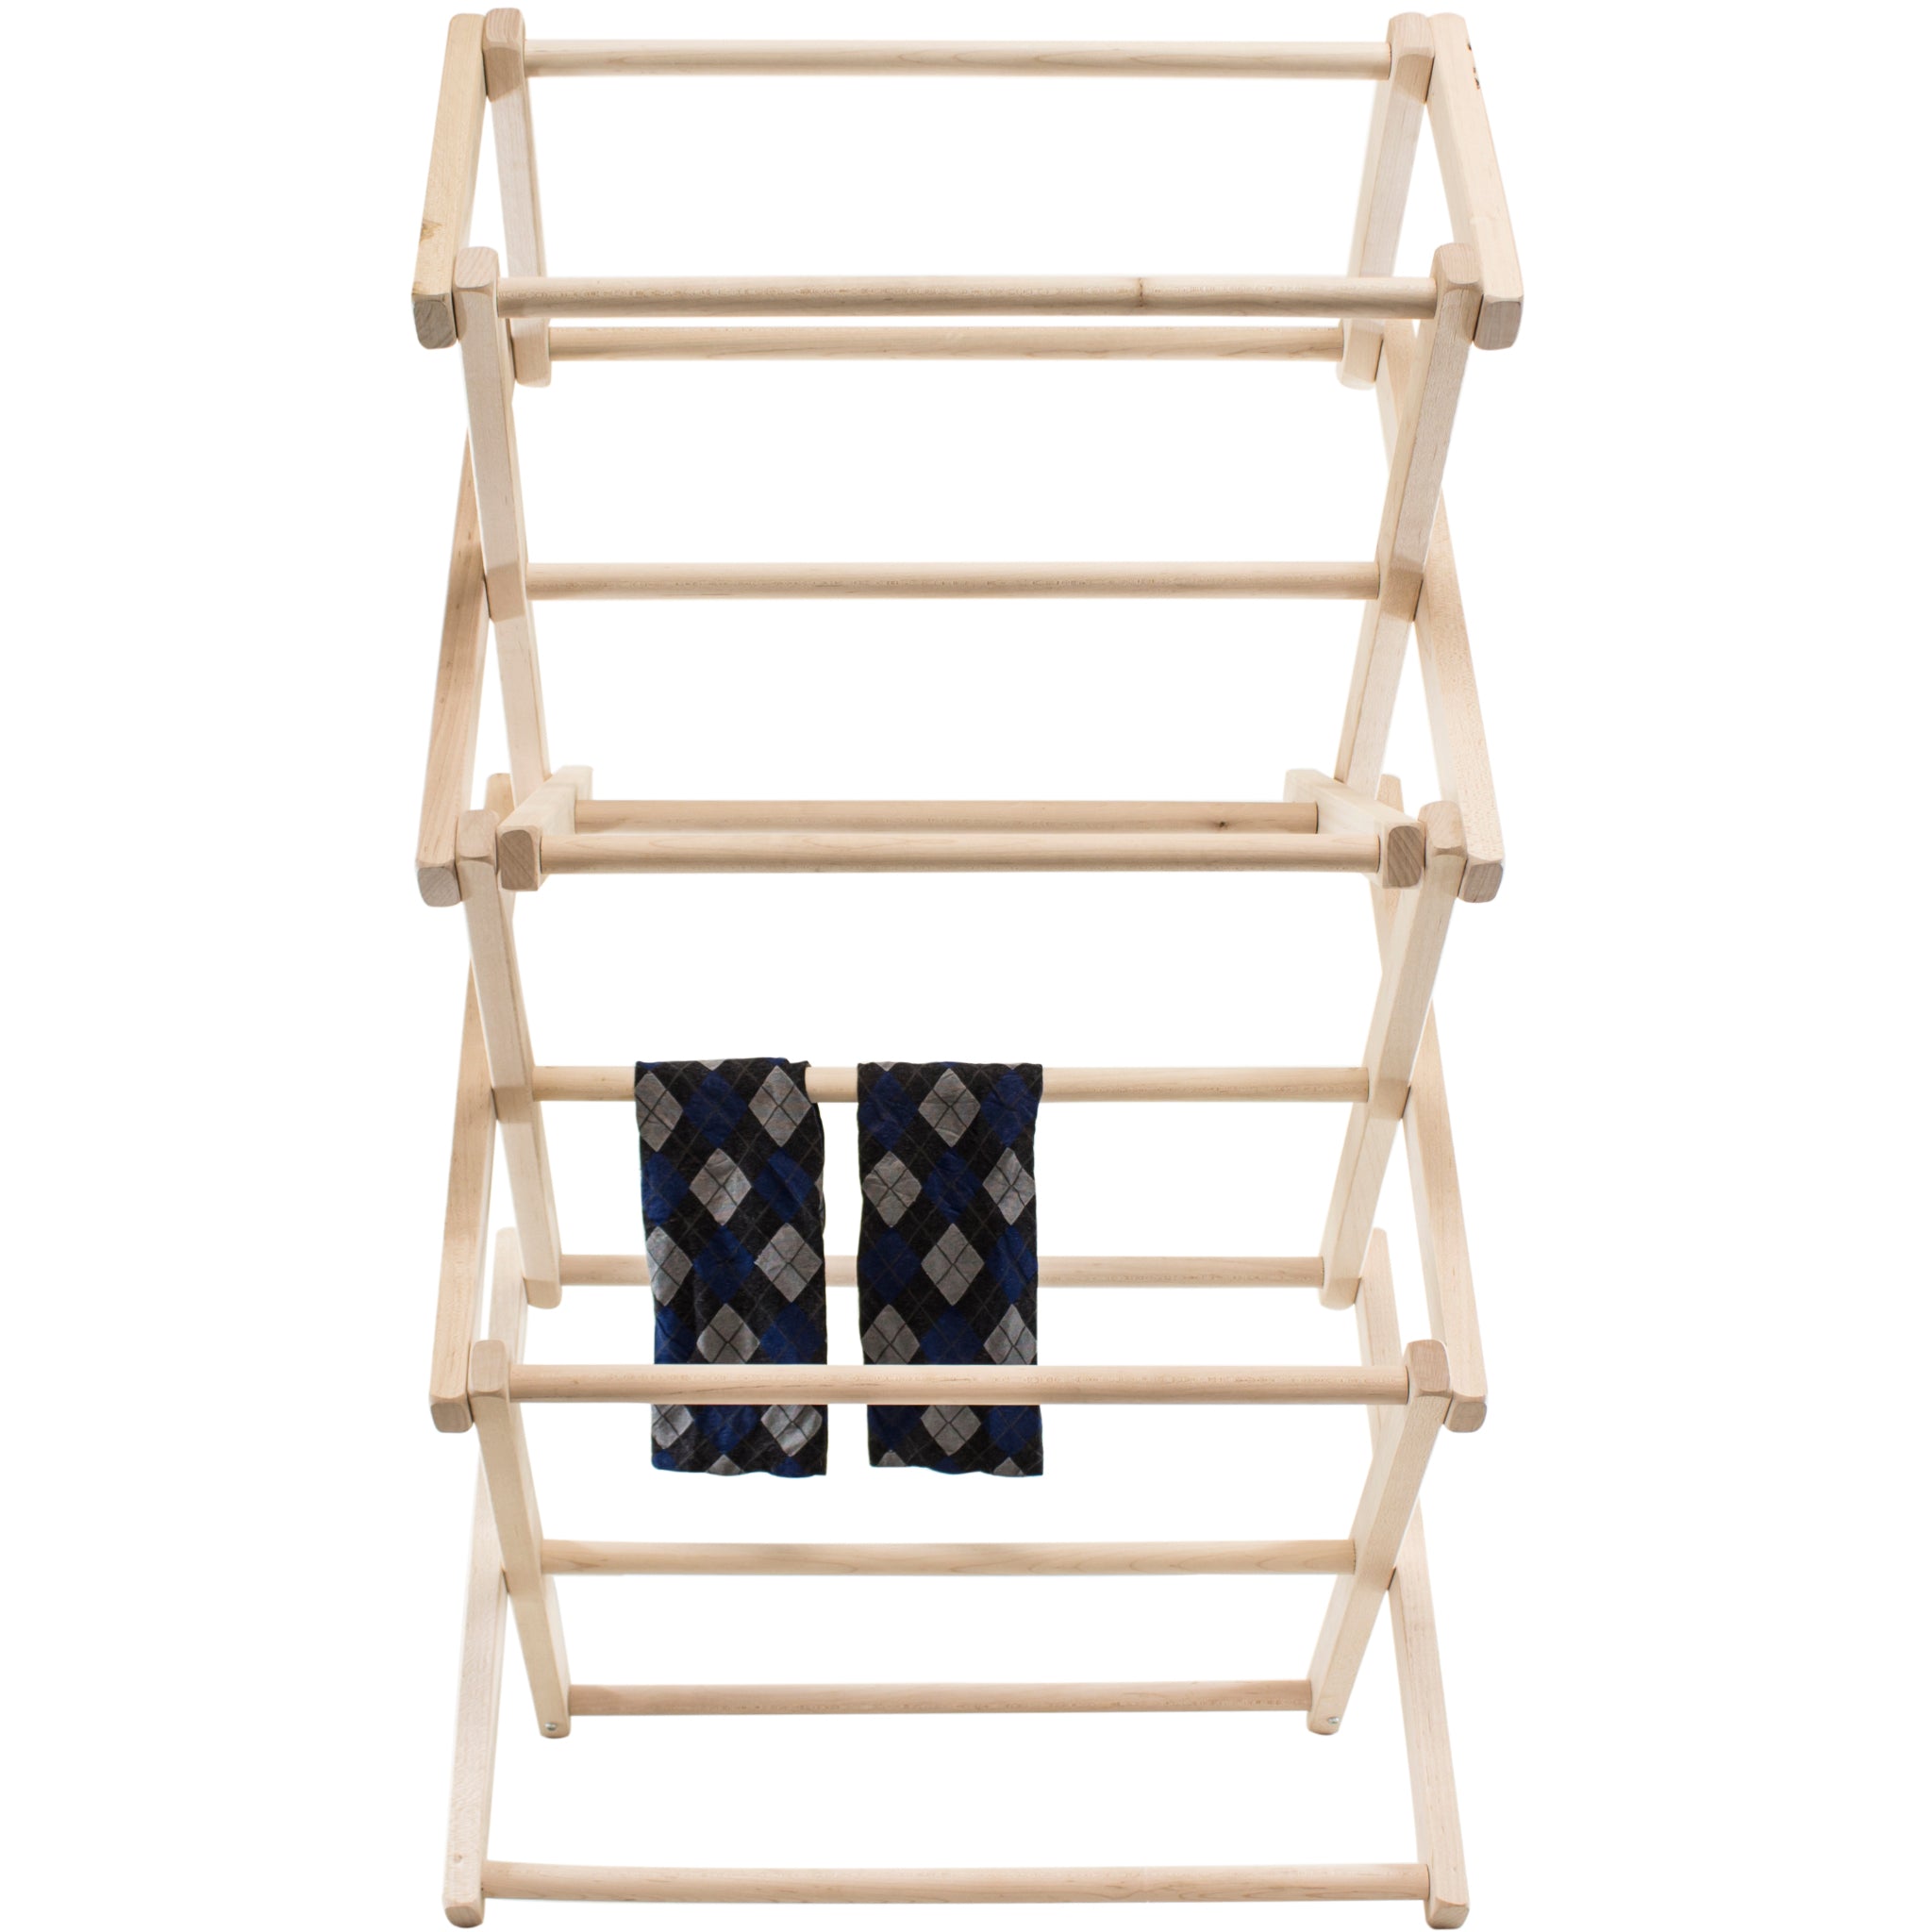 Shop for Wooden Clothes Drying Racks – Good's Store Online